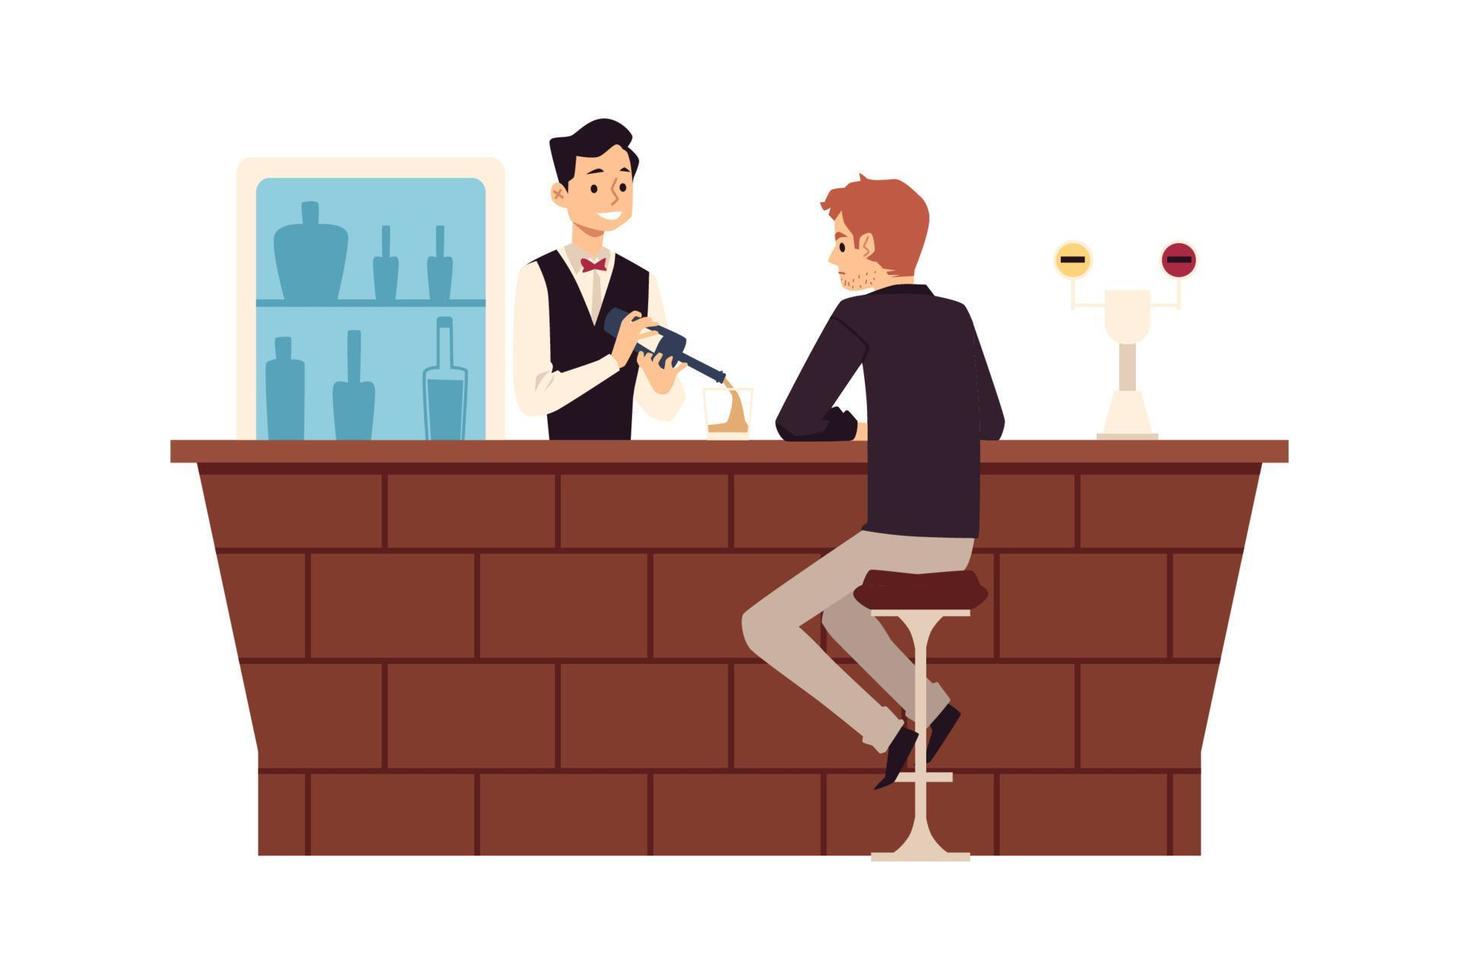 Sad man in loneliness sitting at bar counter and drink alcoholic beverages vector